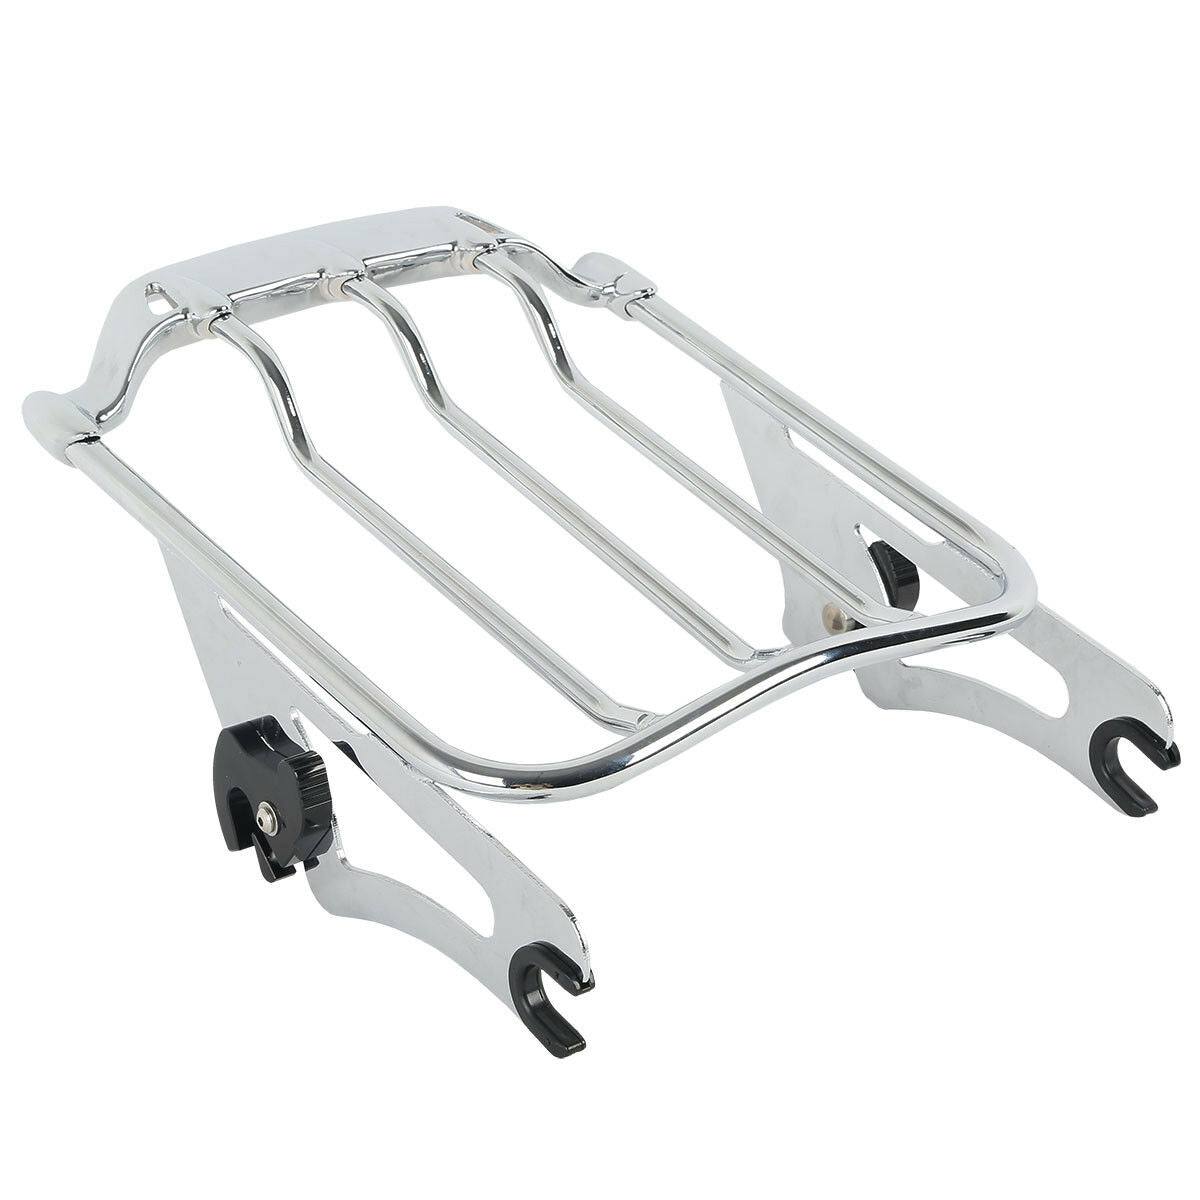 Sissy Backrest & Luggage Rack Fit For Harley Road Glide Road King 09-20 Air Wing - Moto Life Products